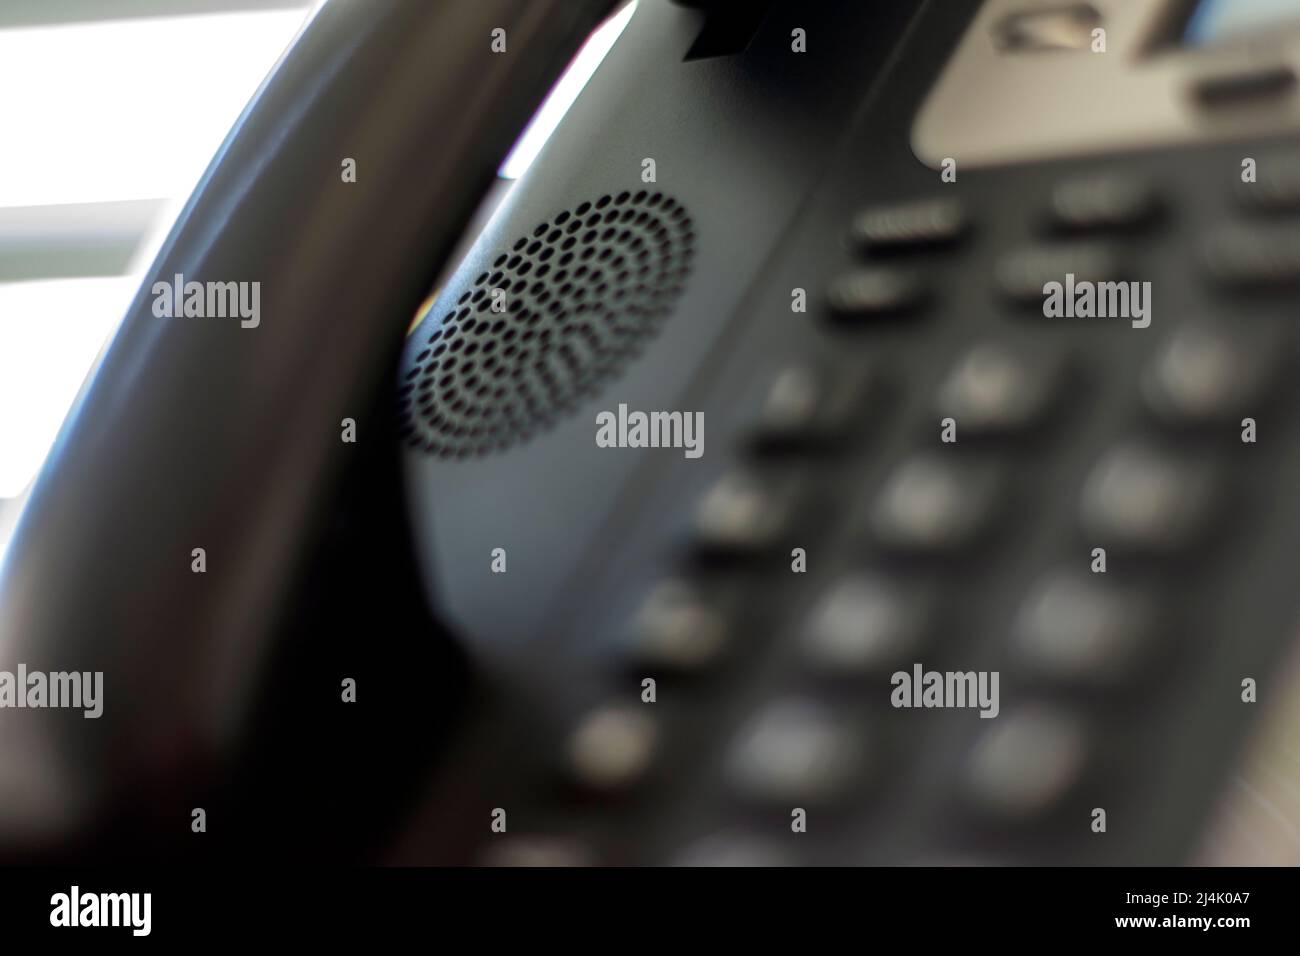 Corporative gear, Telephone and speaker close-up. Call centers and phone lines used on services and remote assistance. Spying communications. Stock Photo